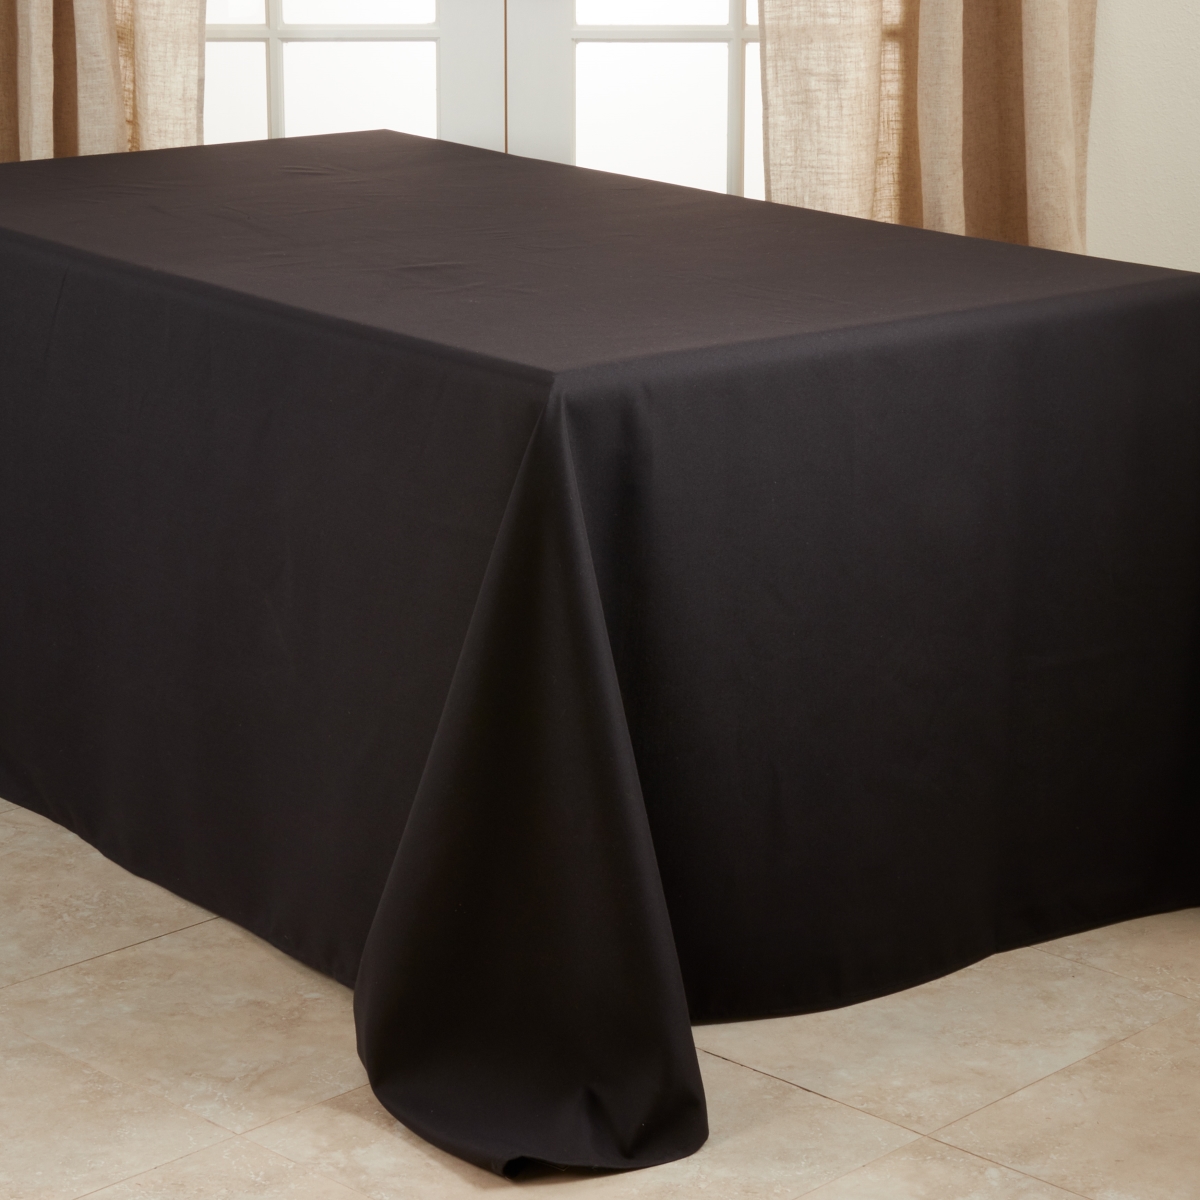 Picture of Saro Lifestyle 321.BK90132B 90 x 132 in. Casual Design Everyday Tablecloth, Black